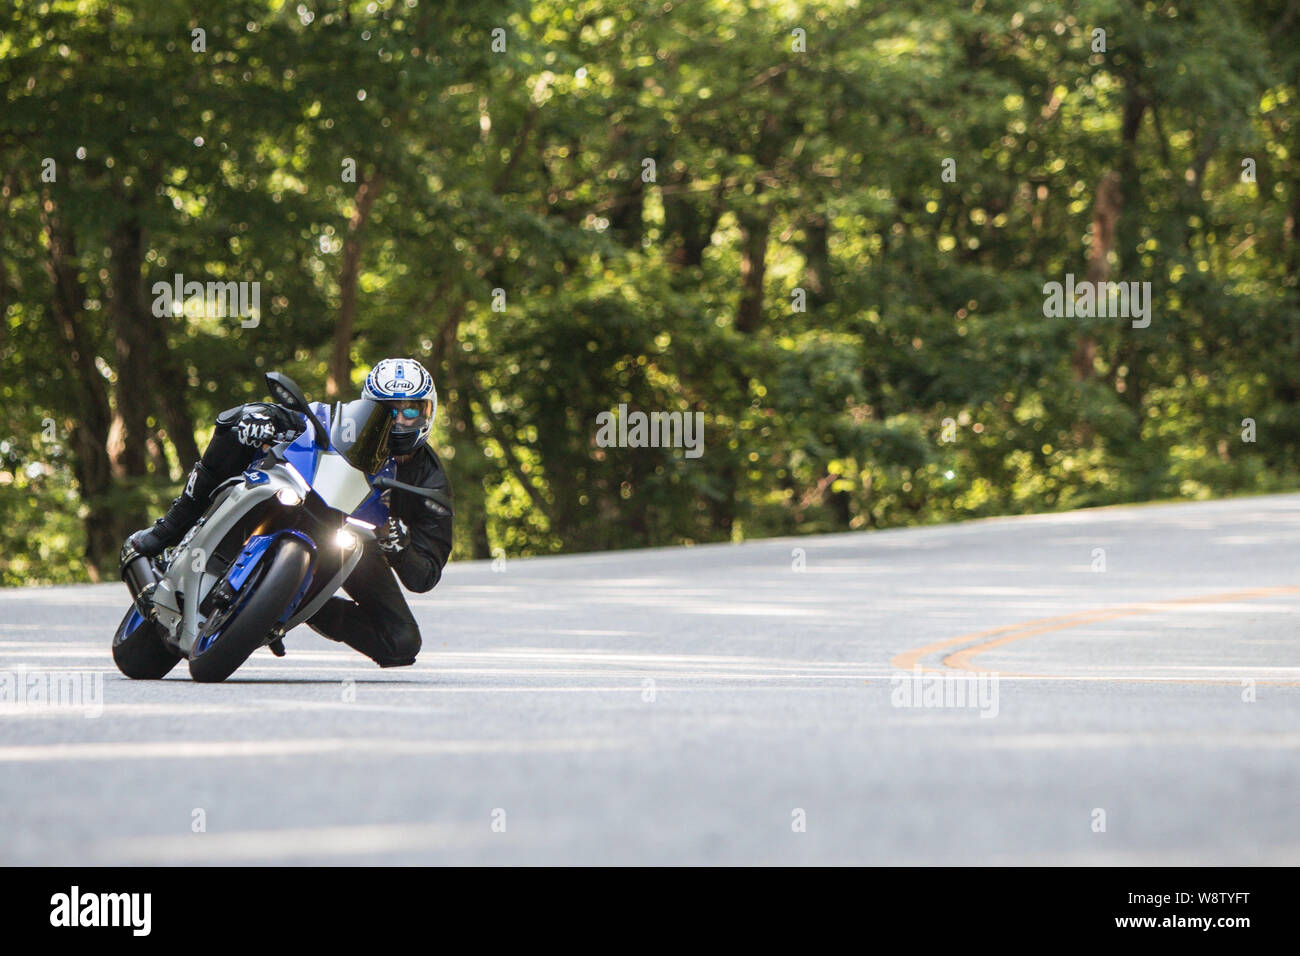 A man riding a road racing motorcycle leans into a turn at a high rate of speed, as he traverses windy roads on June 9, 2018 in Blairsville, GA. Stock Photo